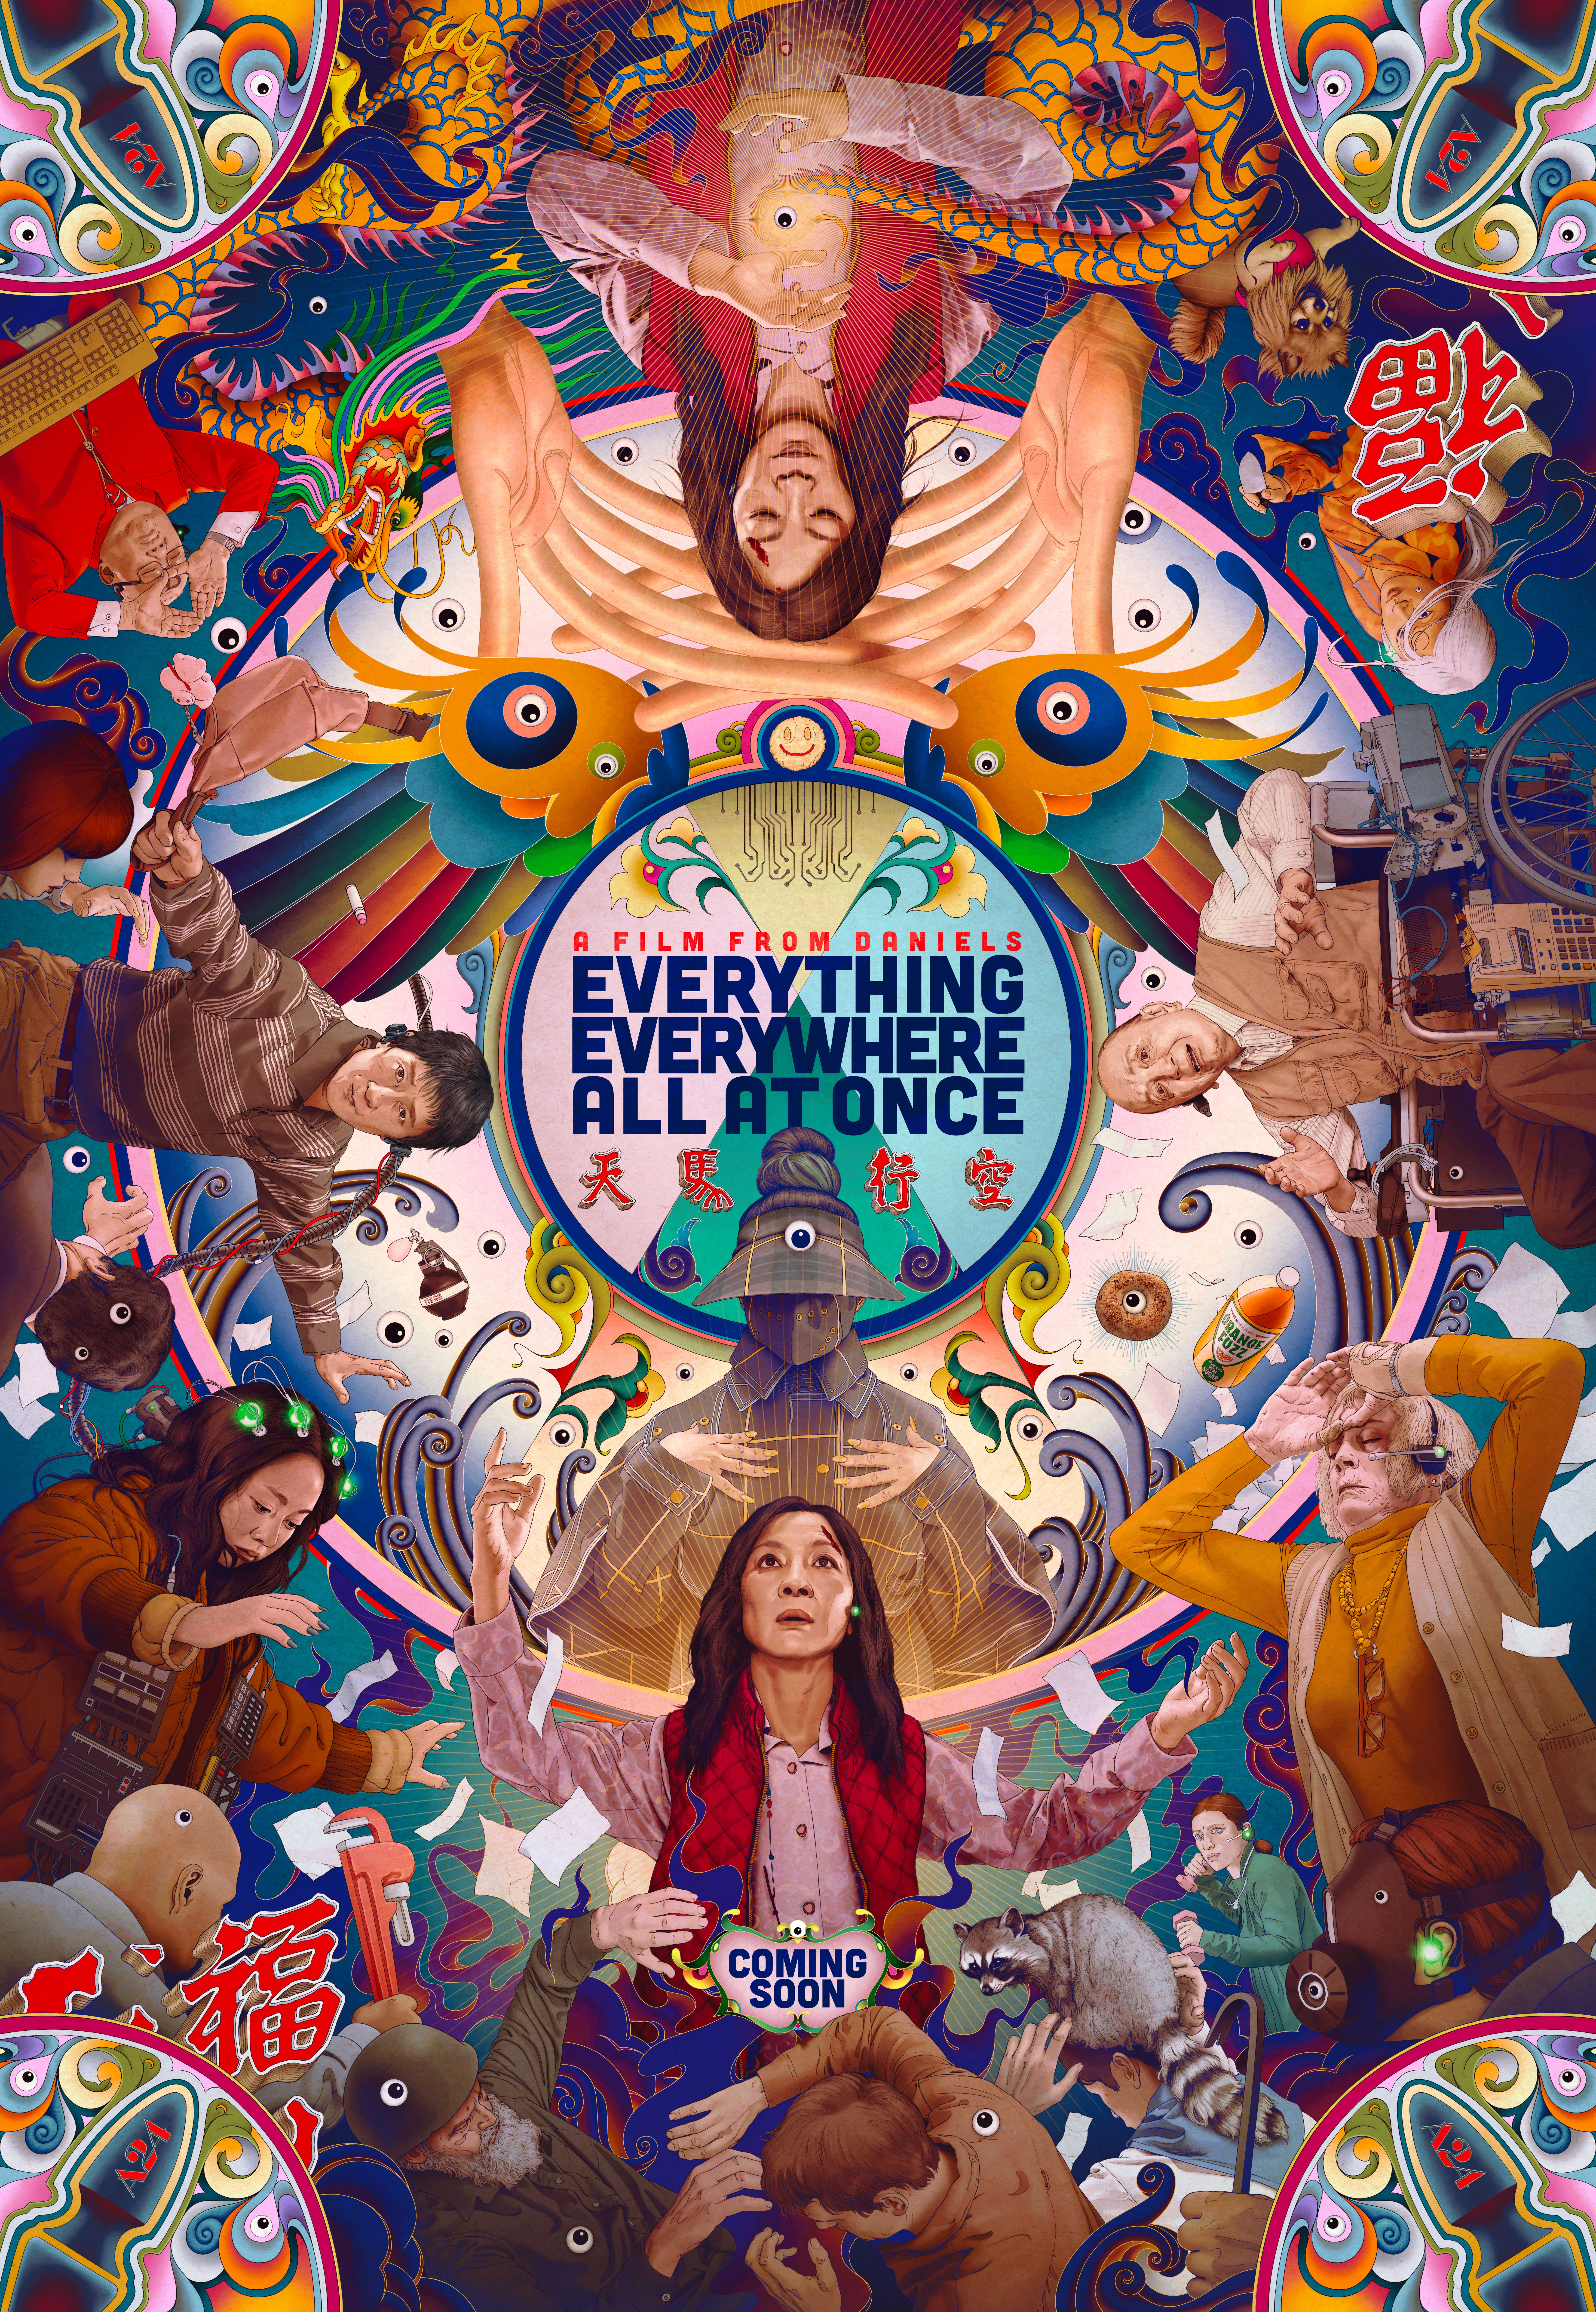 Artist James Jean’s poster for “Everything Everywhere All of the Time”